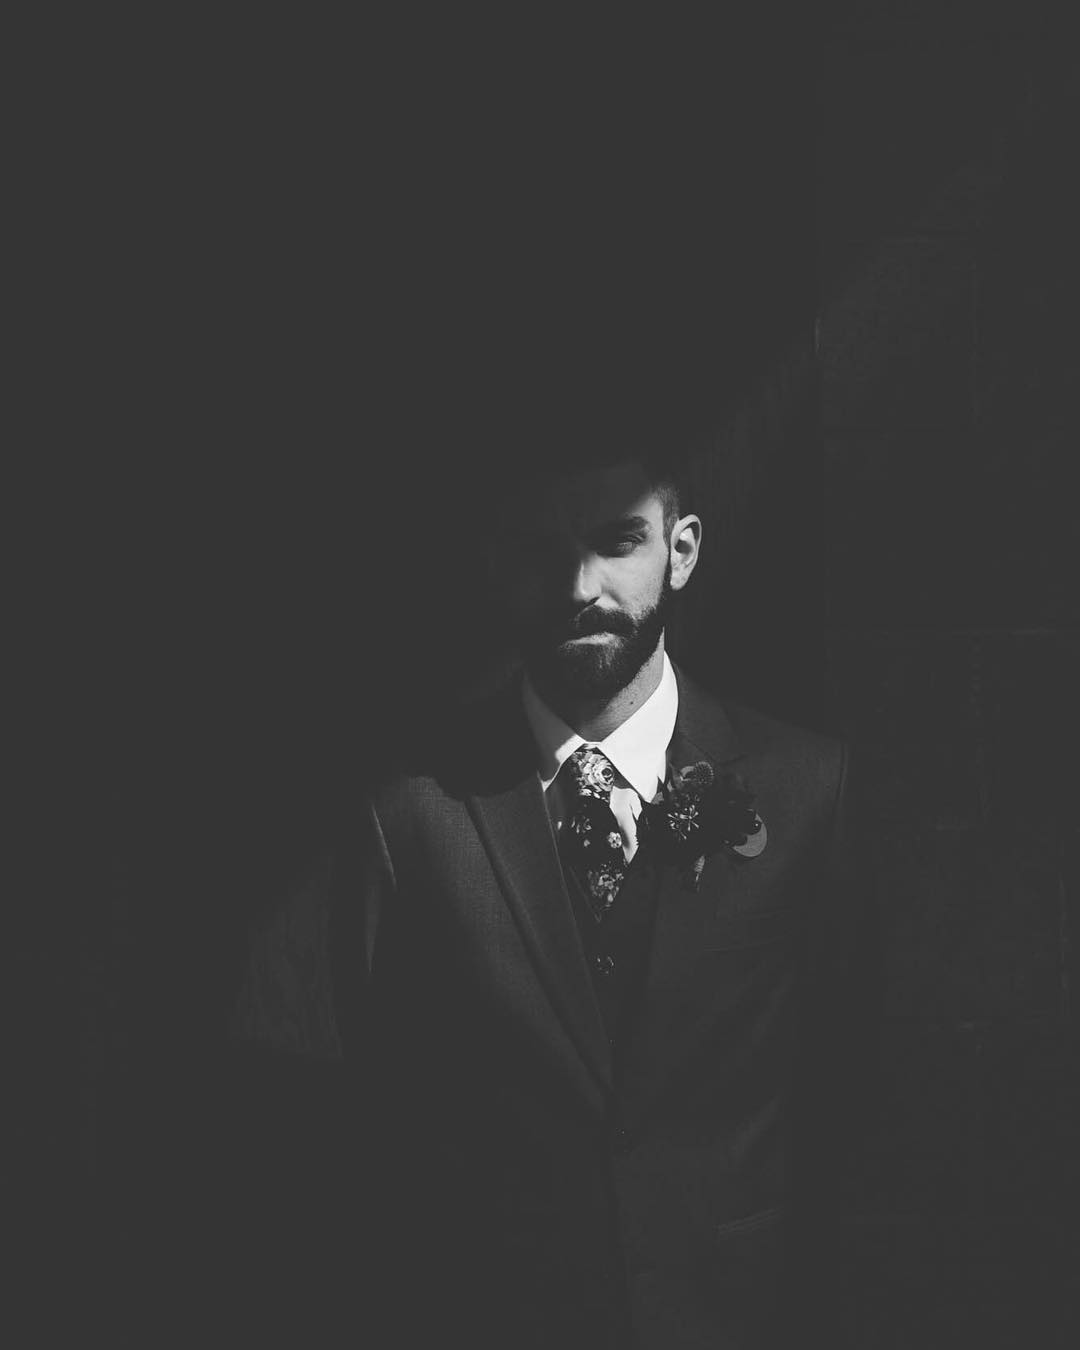 A creatively shot image of bridegroom with lights and shadows